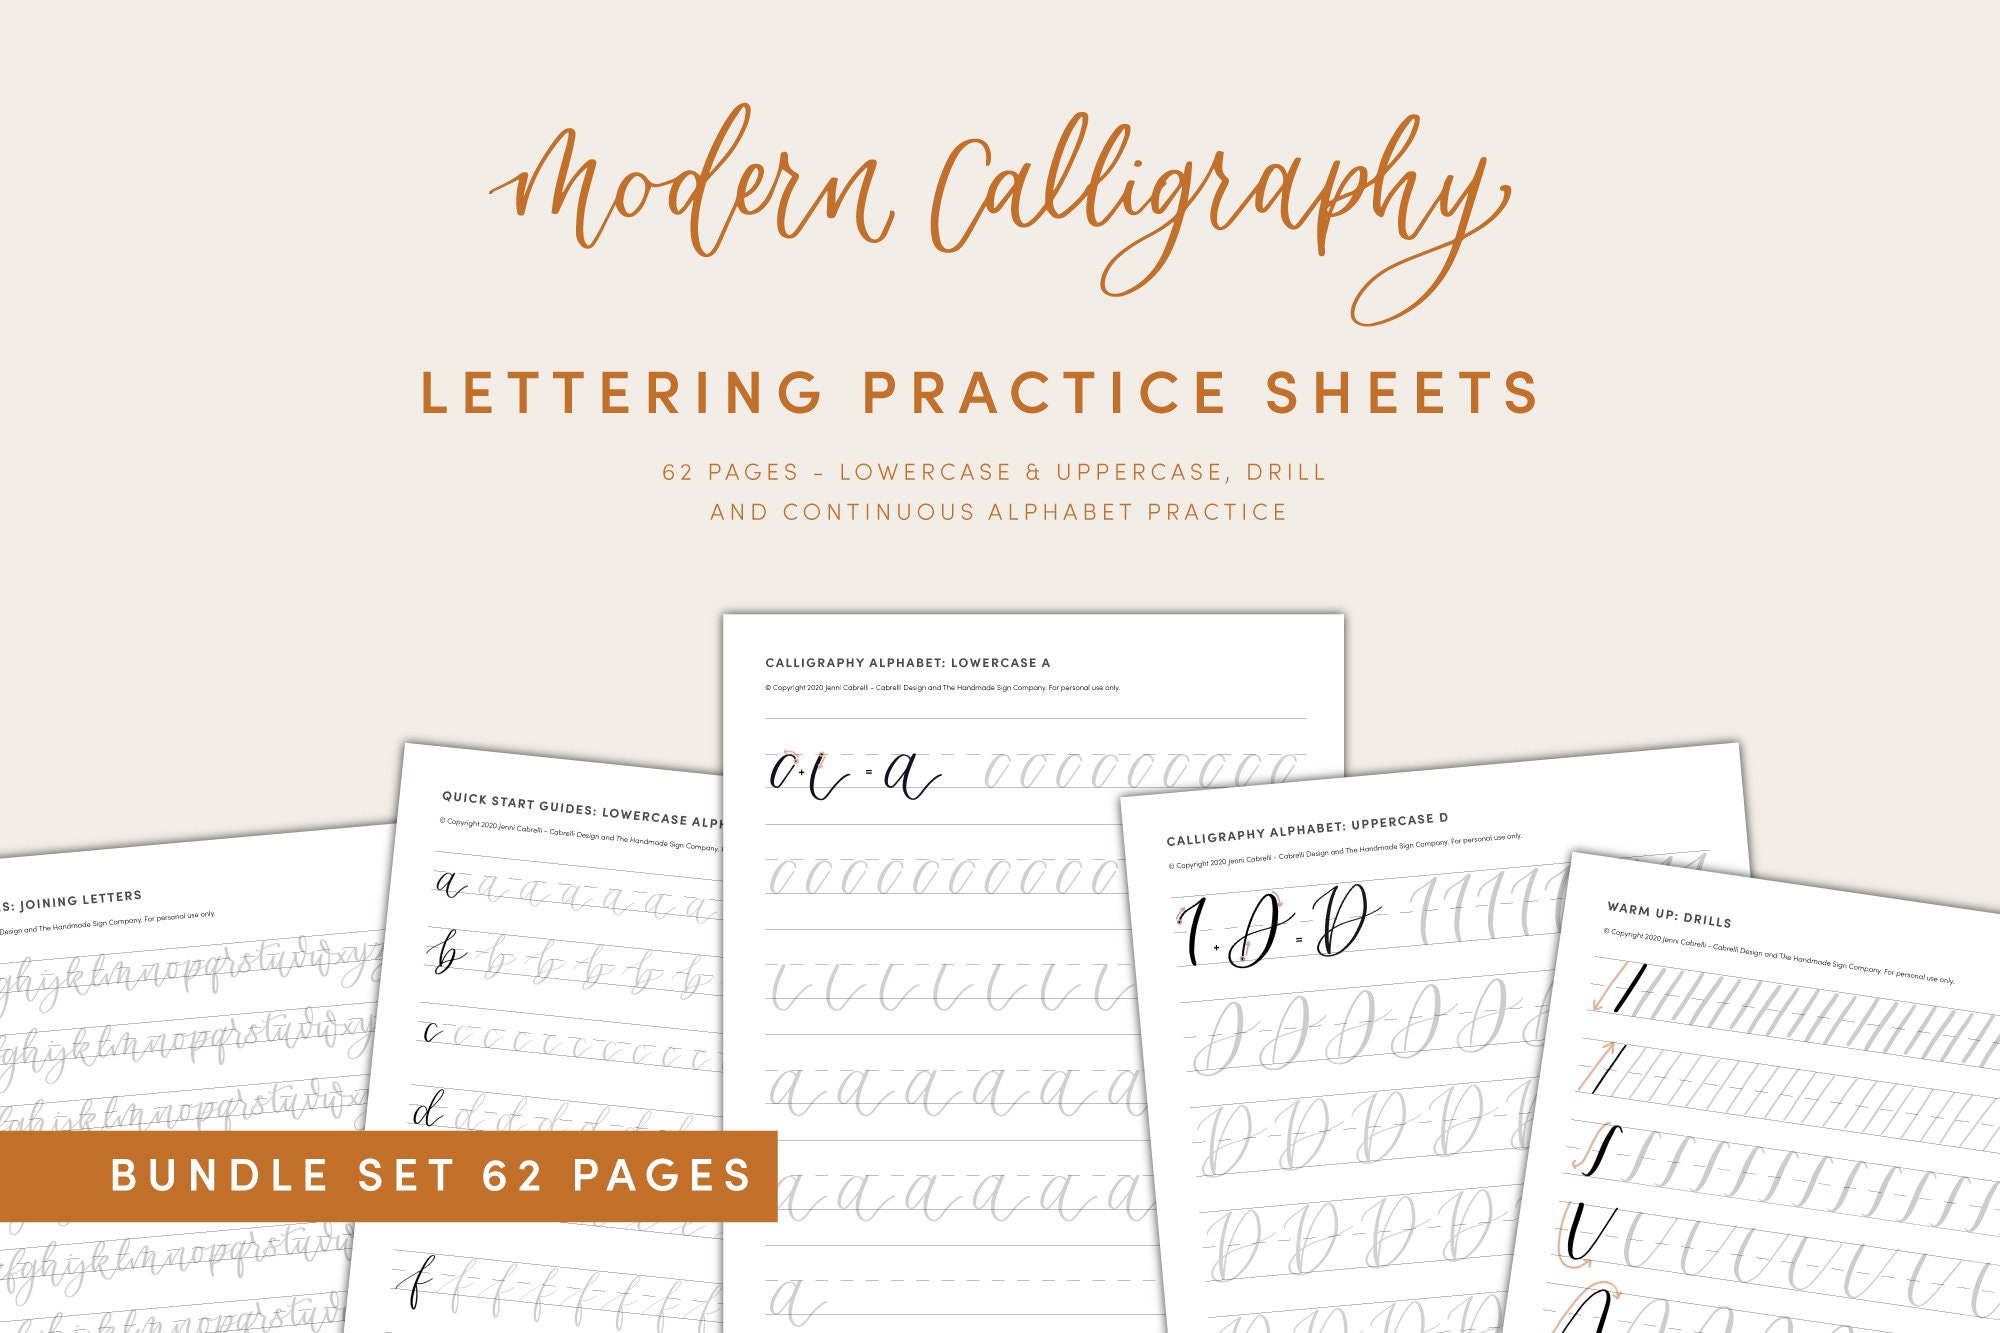 Beginner Level 1 Practice Drills for Copperplate Calligraphy: Digital  Download Worksheet One-pager for Beginners in Traditional Calligraphy 